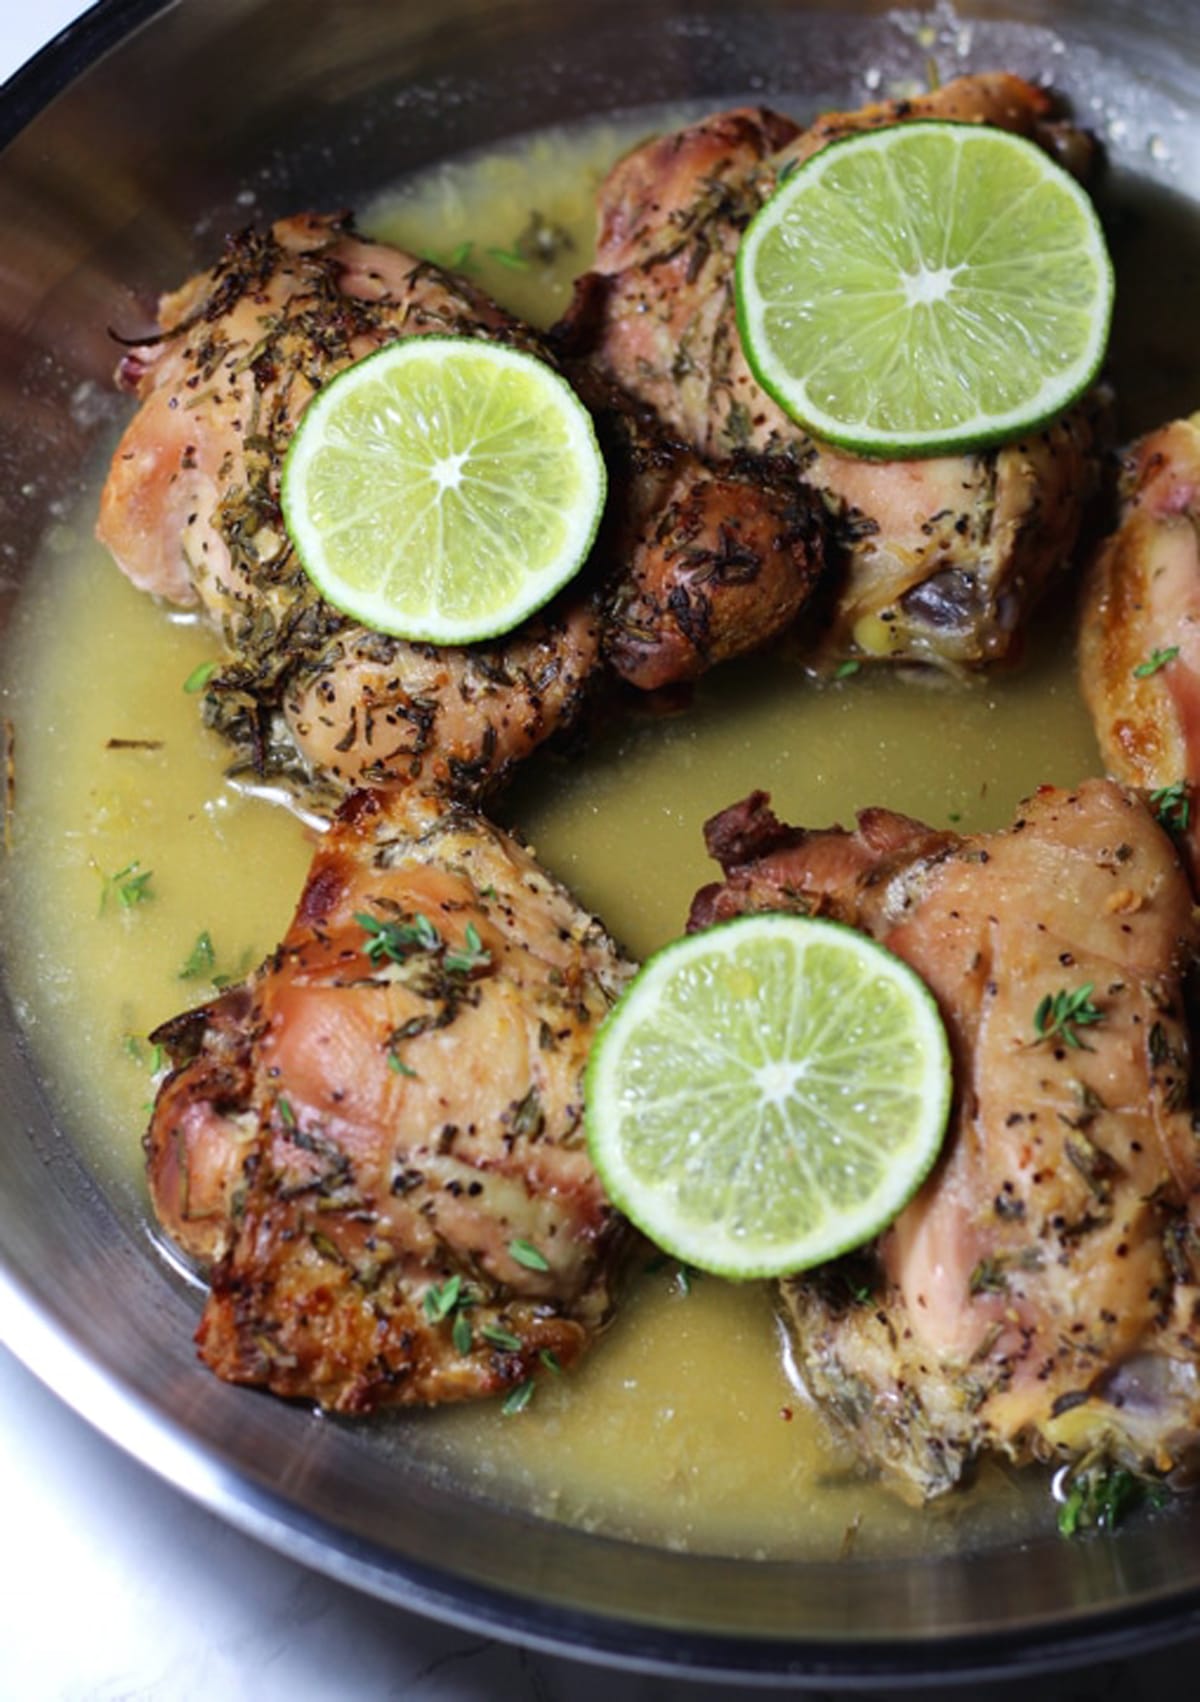 Silver pan containing 5 Lemon Thyme Chicken thights with Garlic and Rosemary, topped with lime slices.